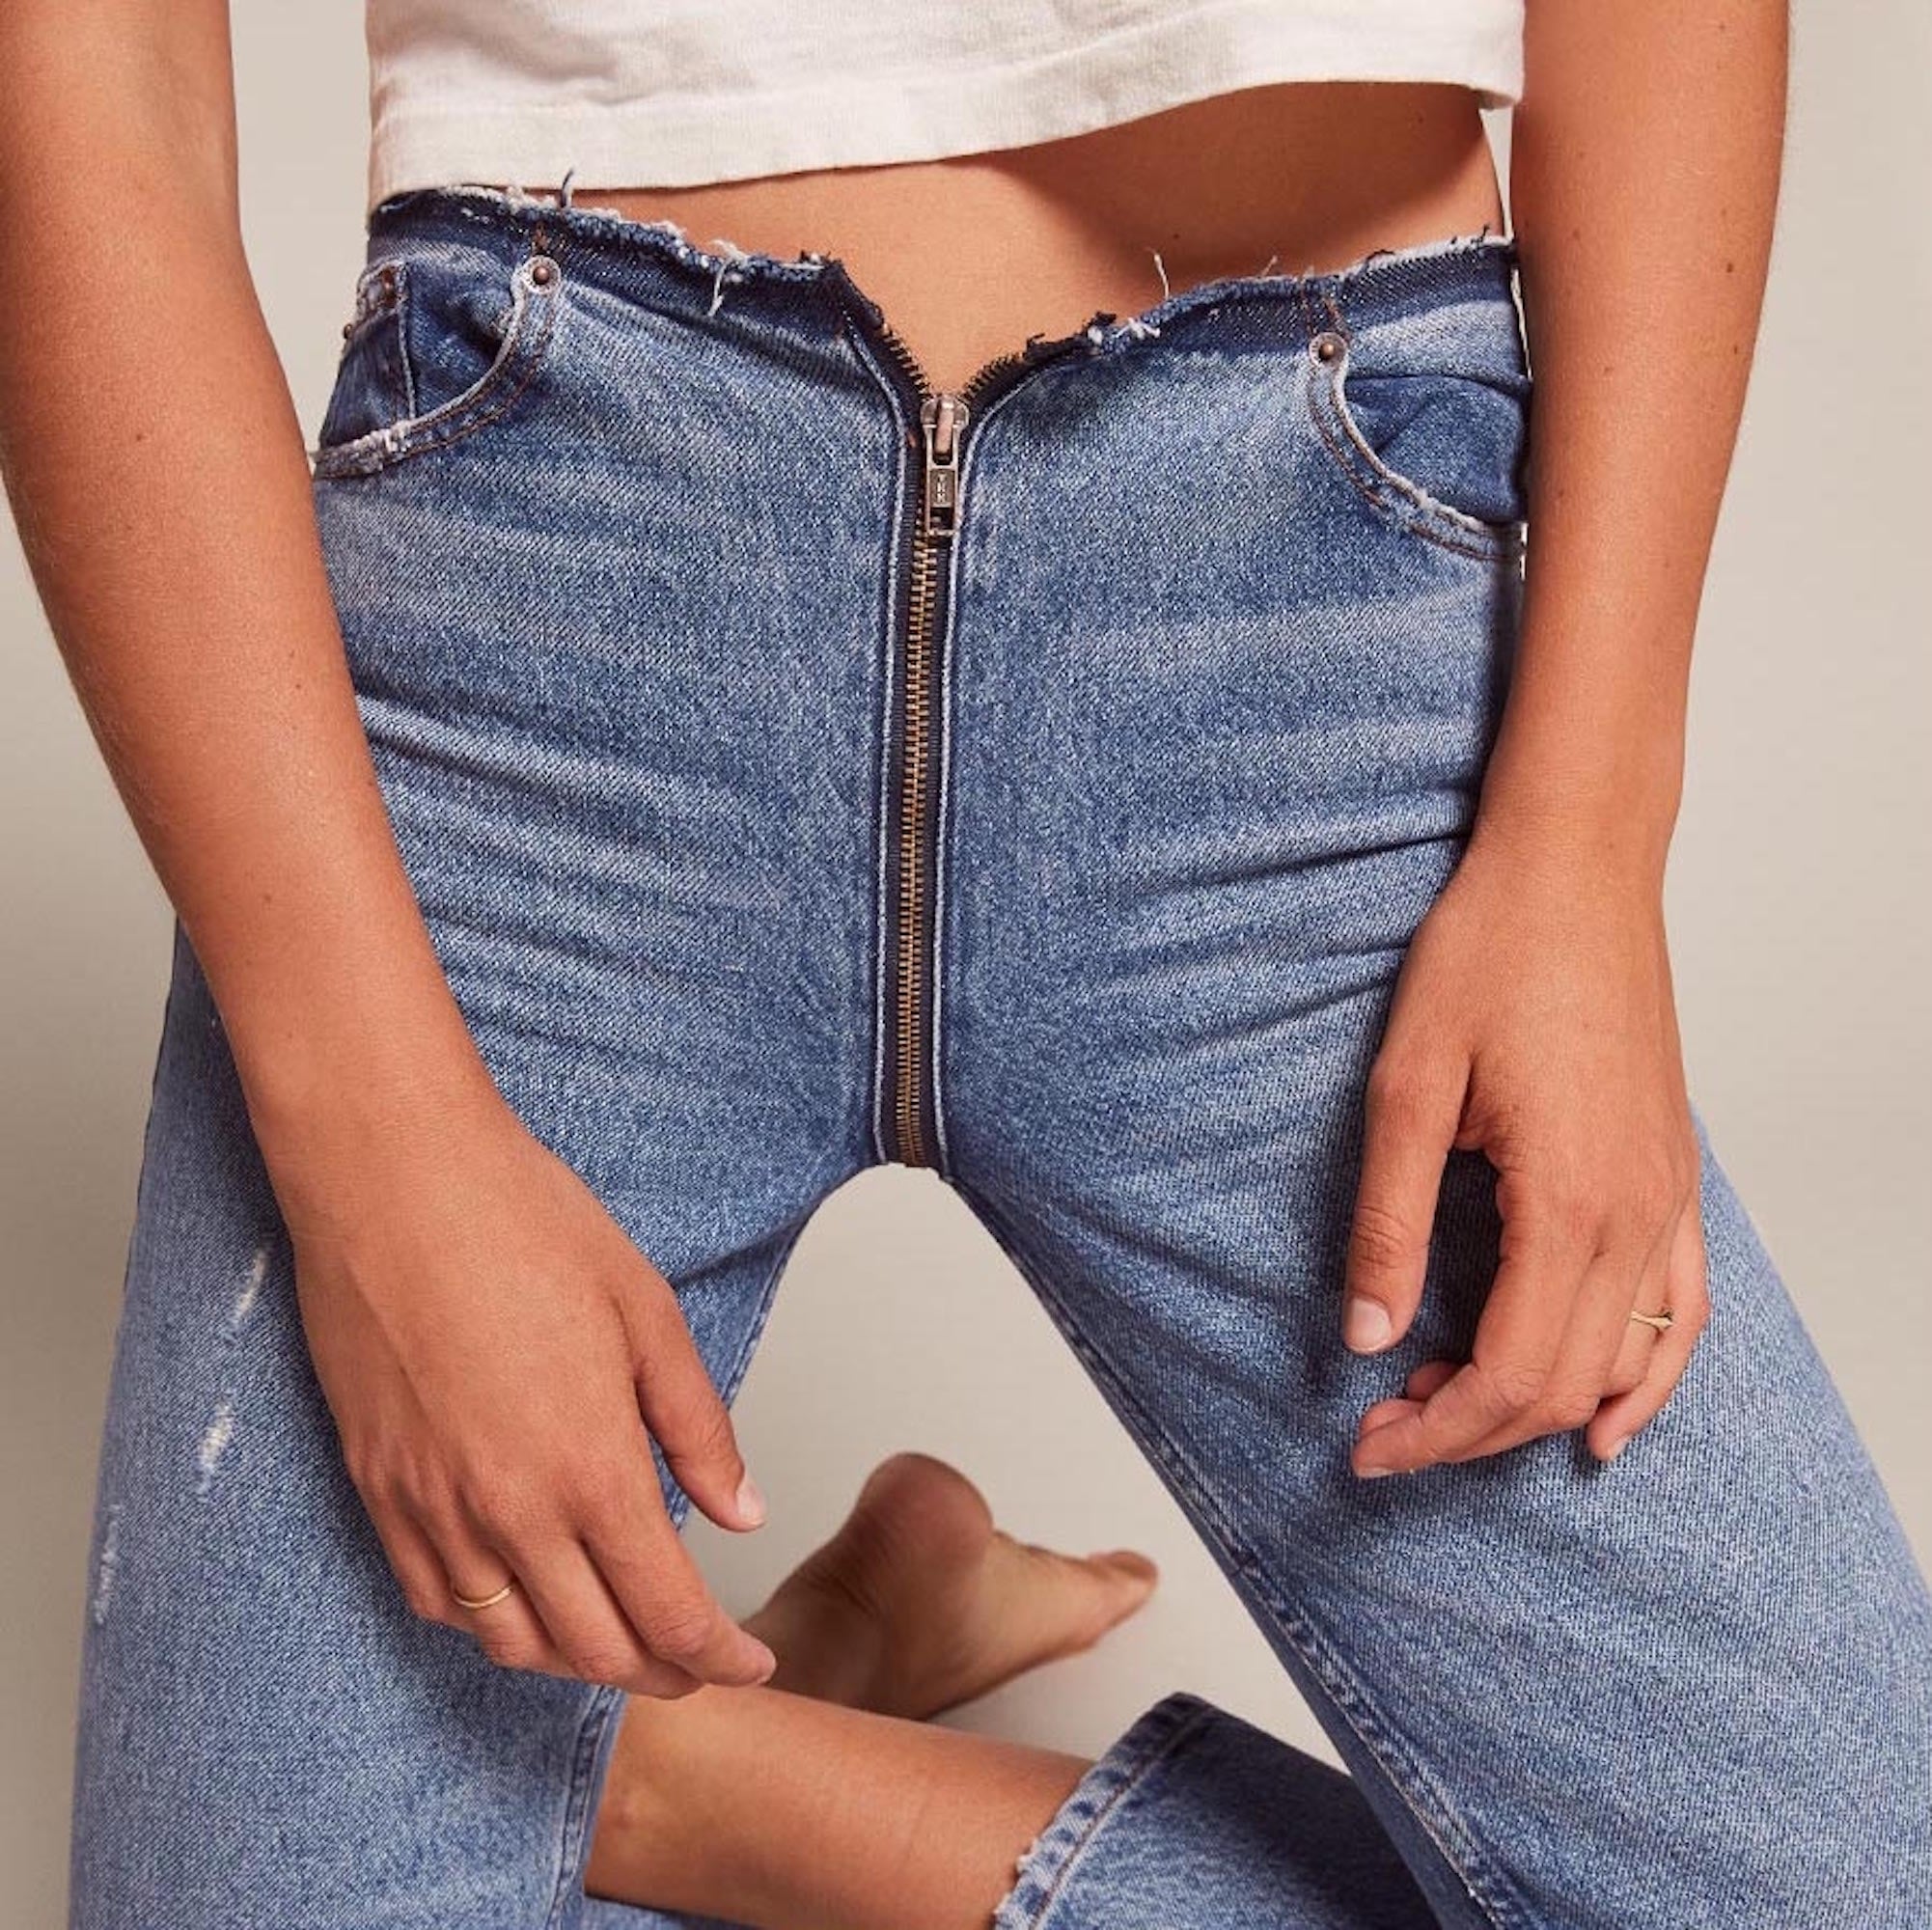 jean with zipper in the back